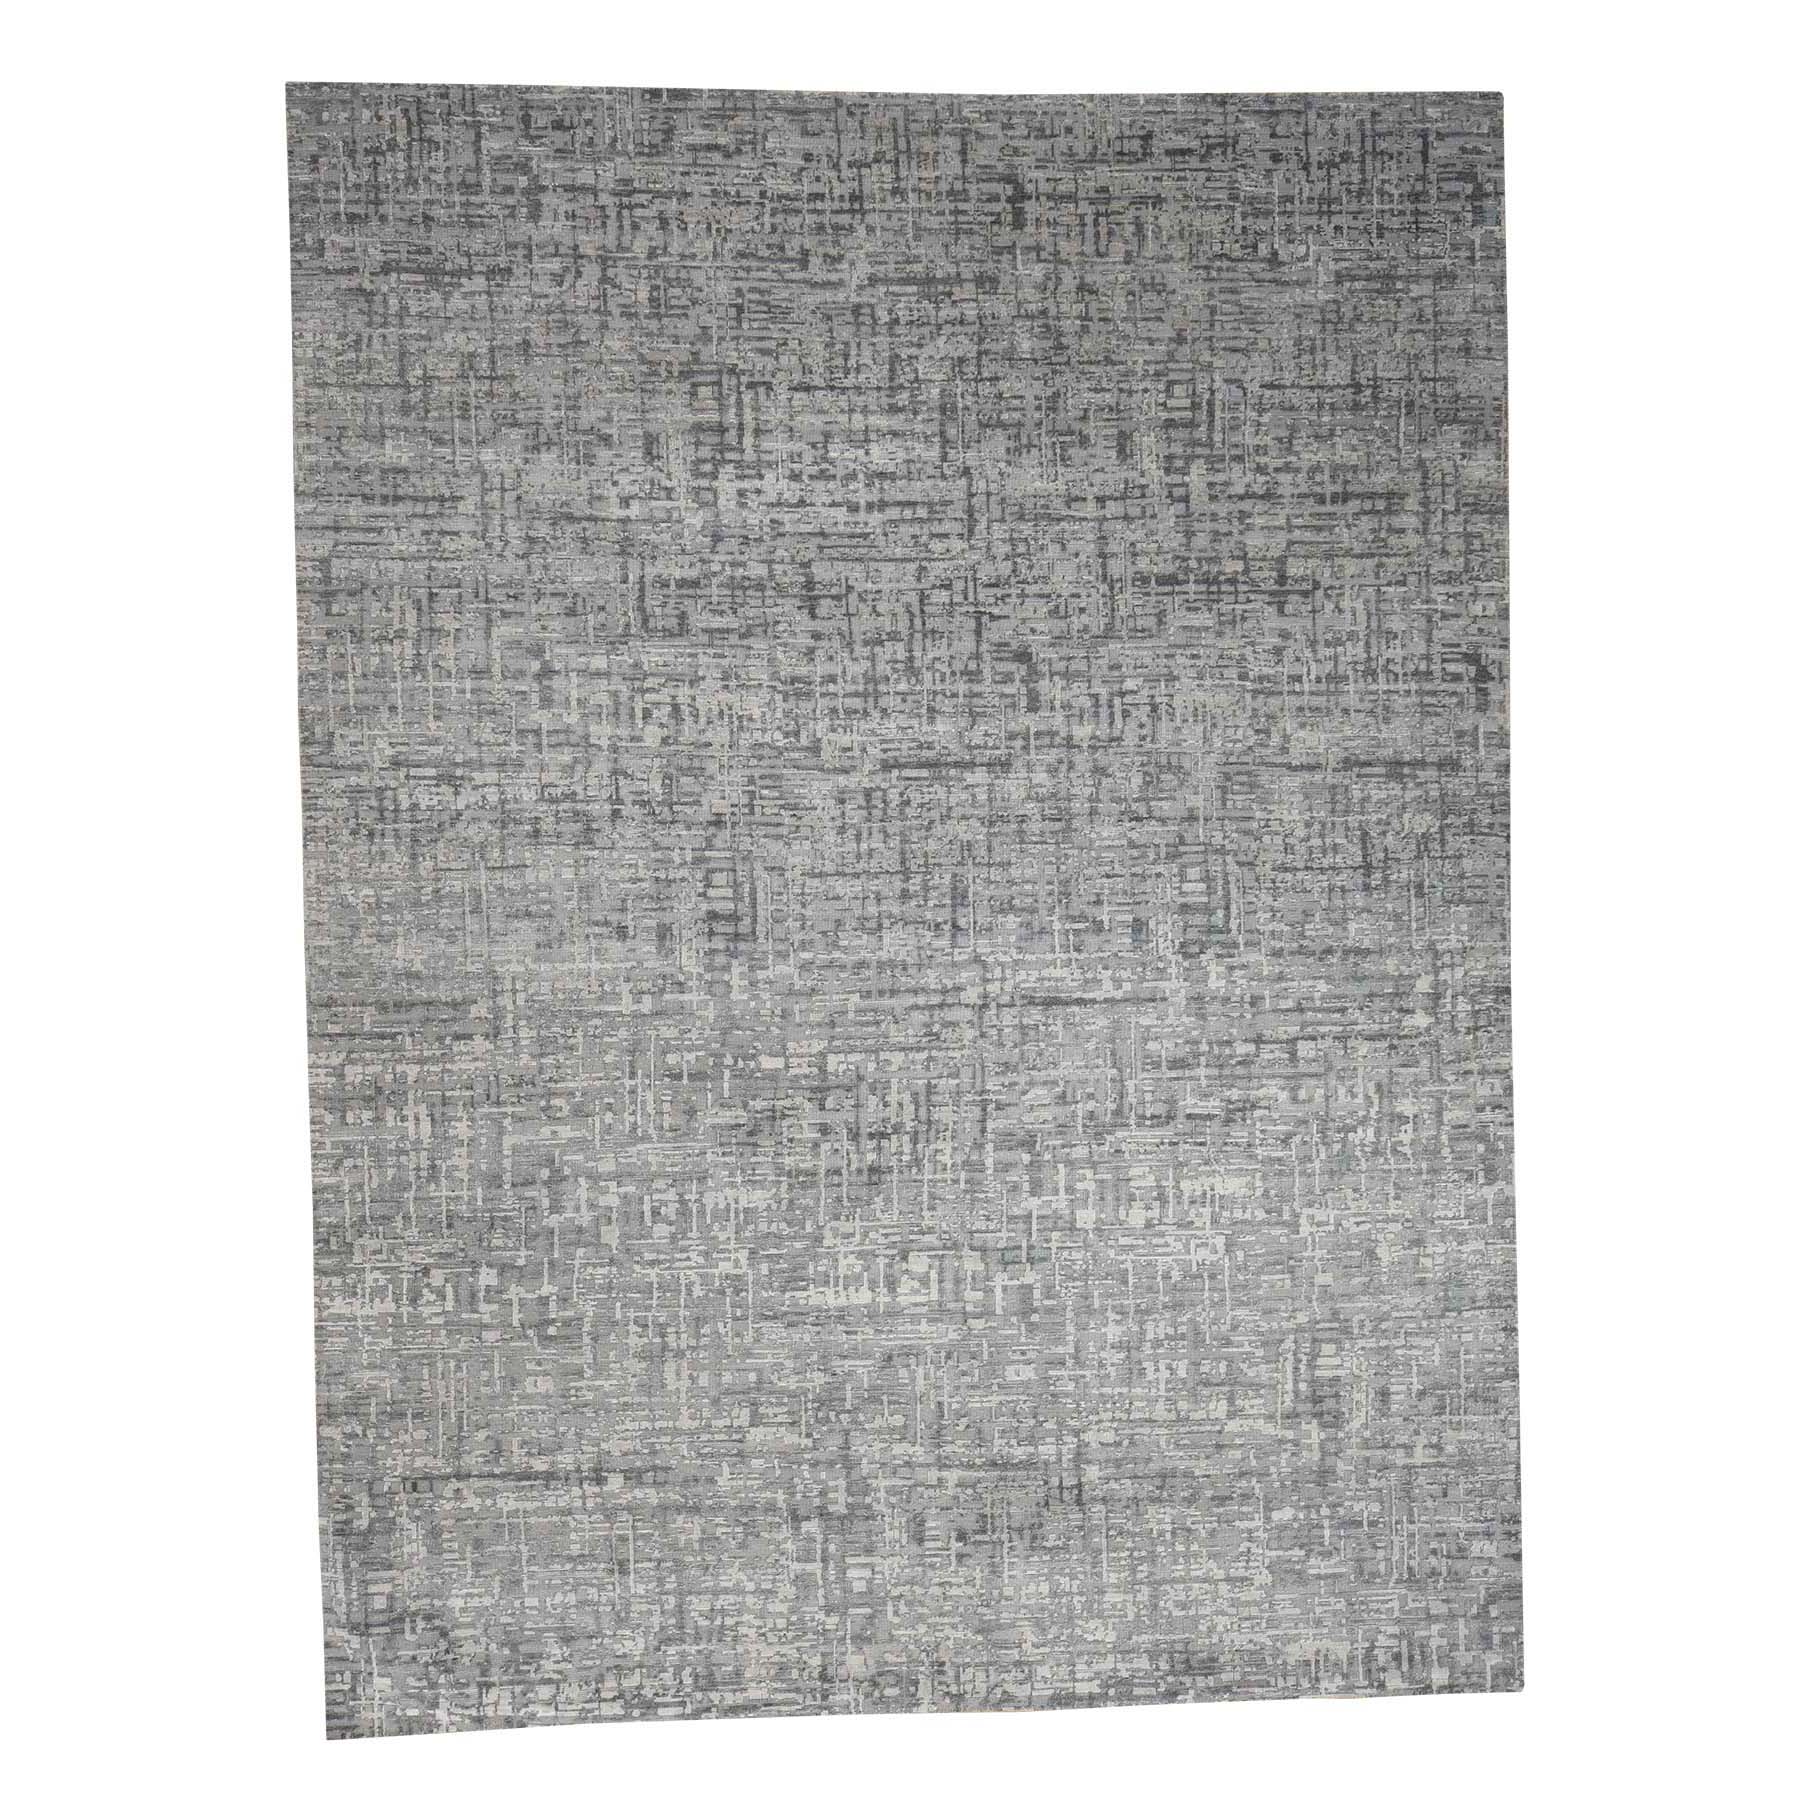 9'2"x12'4" THE MATRIX Pure Silk with Textured Wool Tone on Tone Hand Woven Rug 